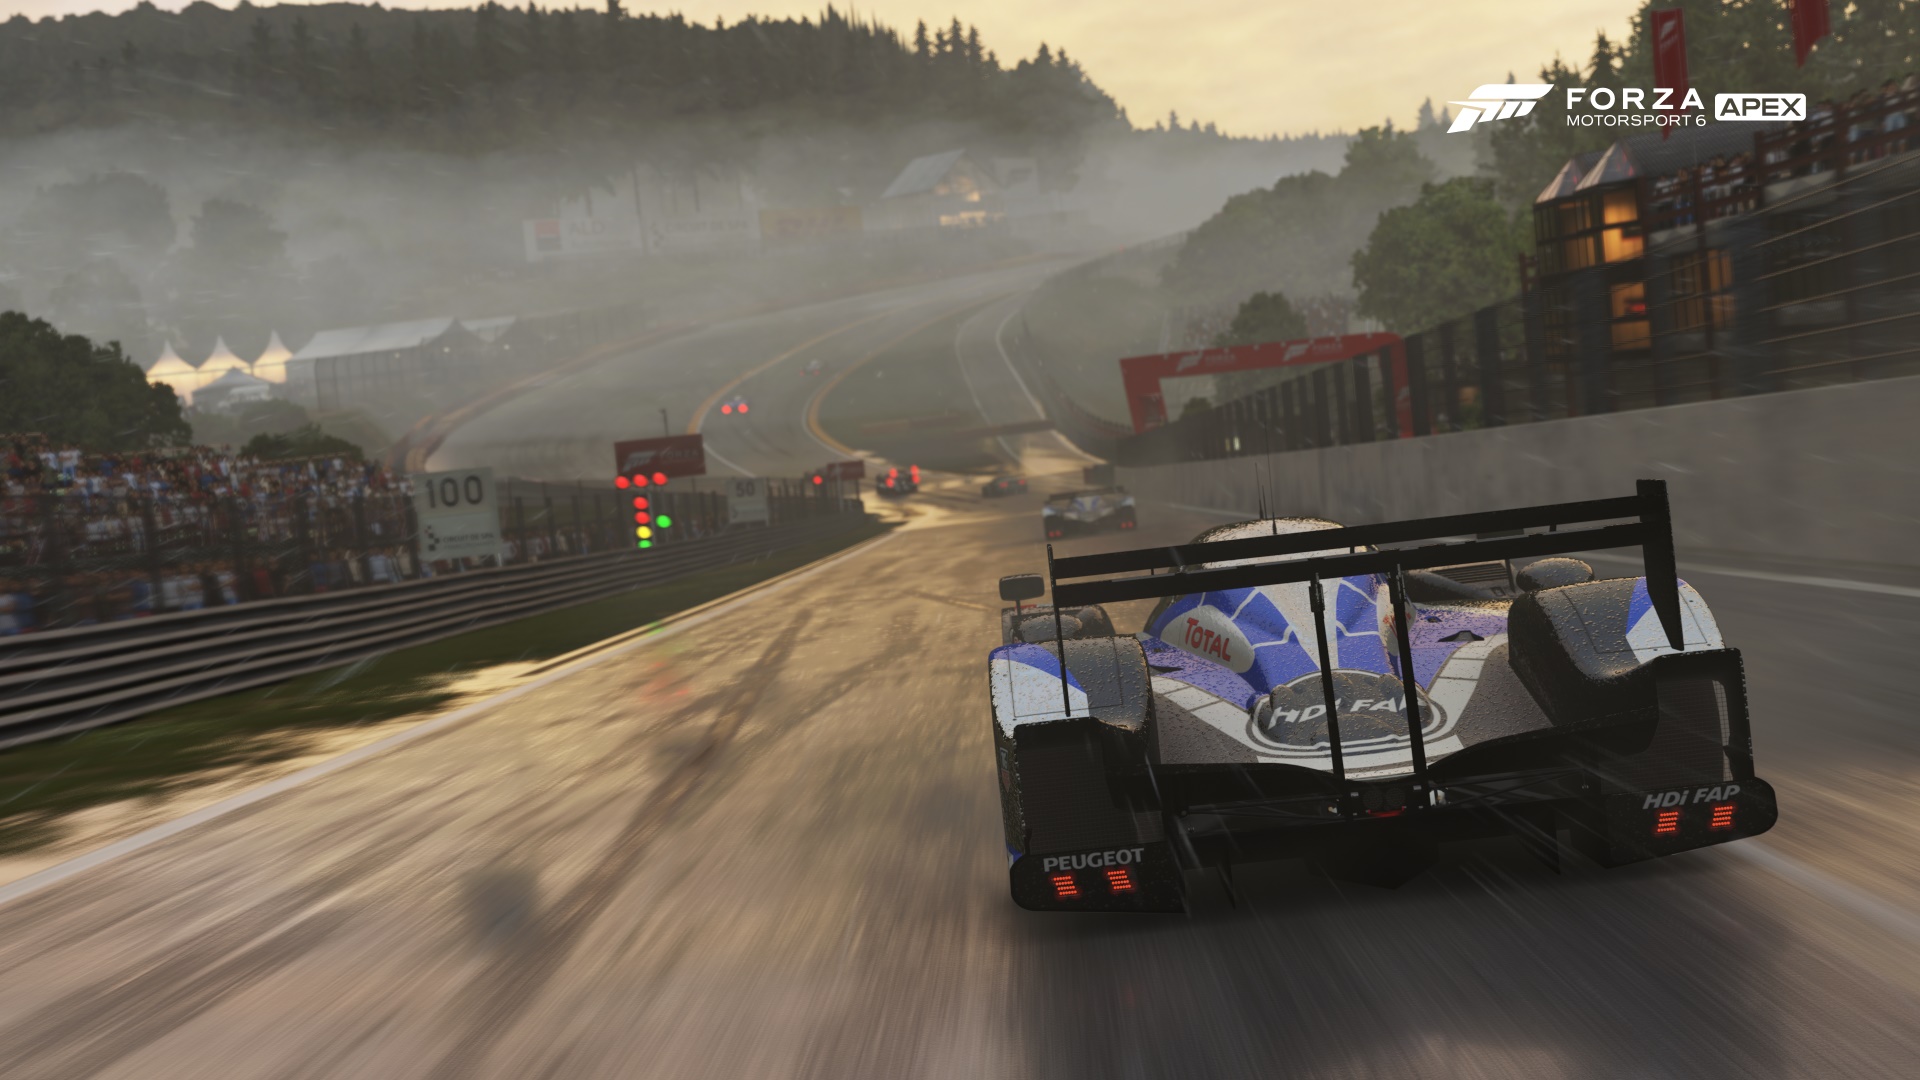 Forza Motorsport 6 Gameplay Impressions With Gameplay Footage - video  Dailymotion